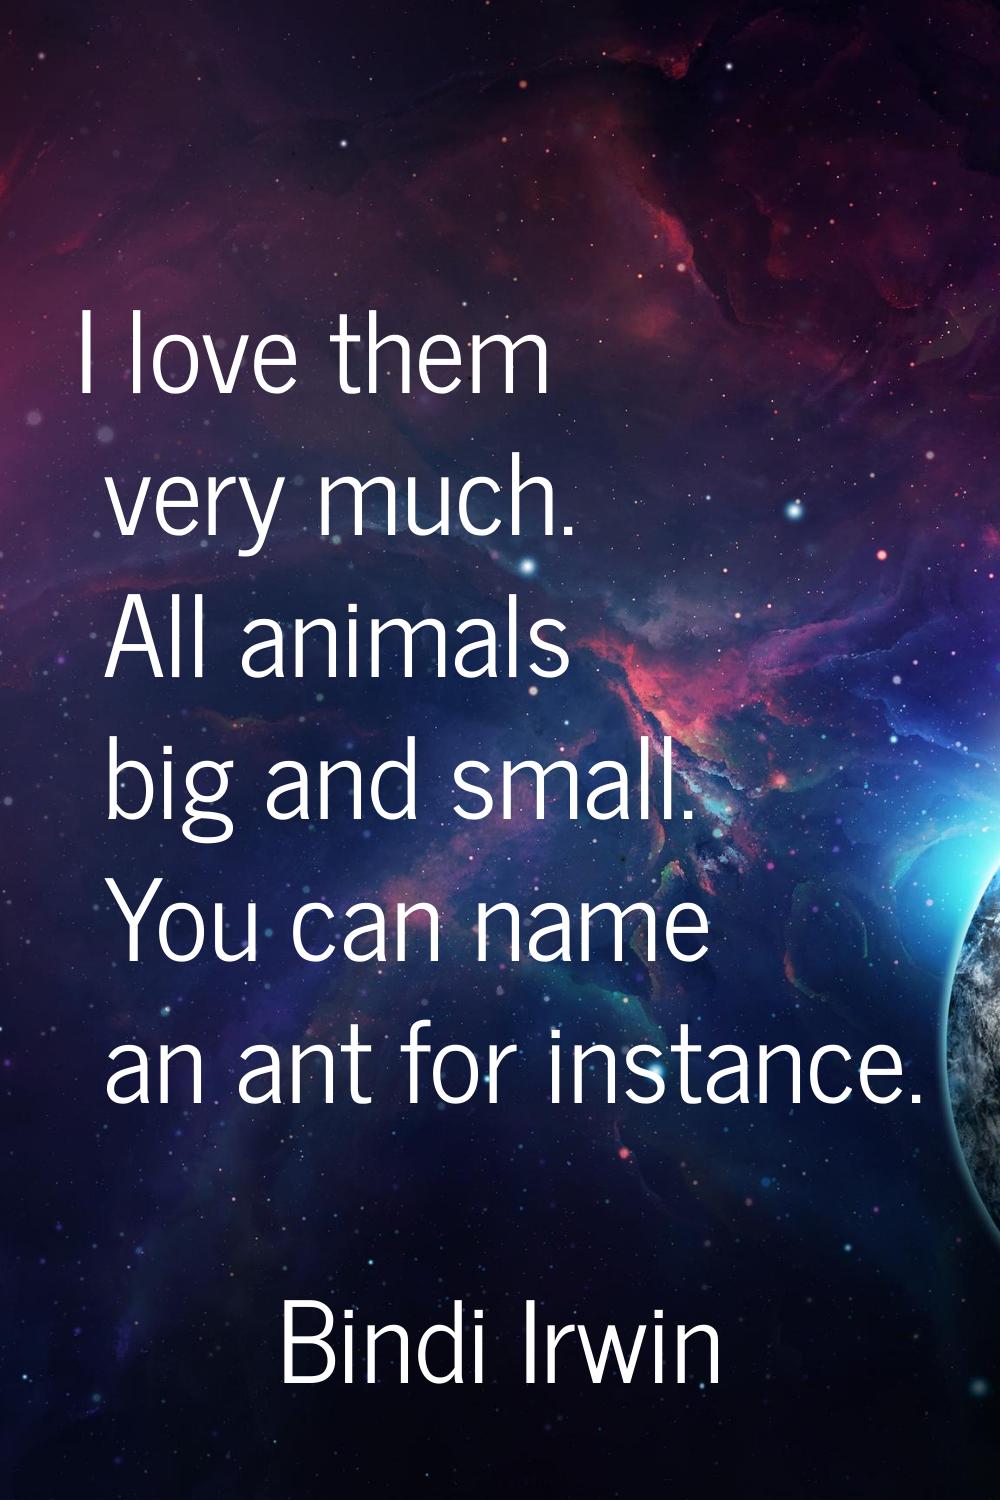 I love them very much. All animals big and small. You can name an ant for instance.